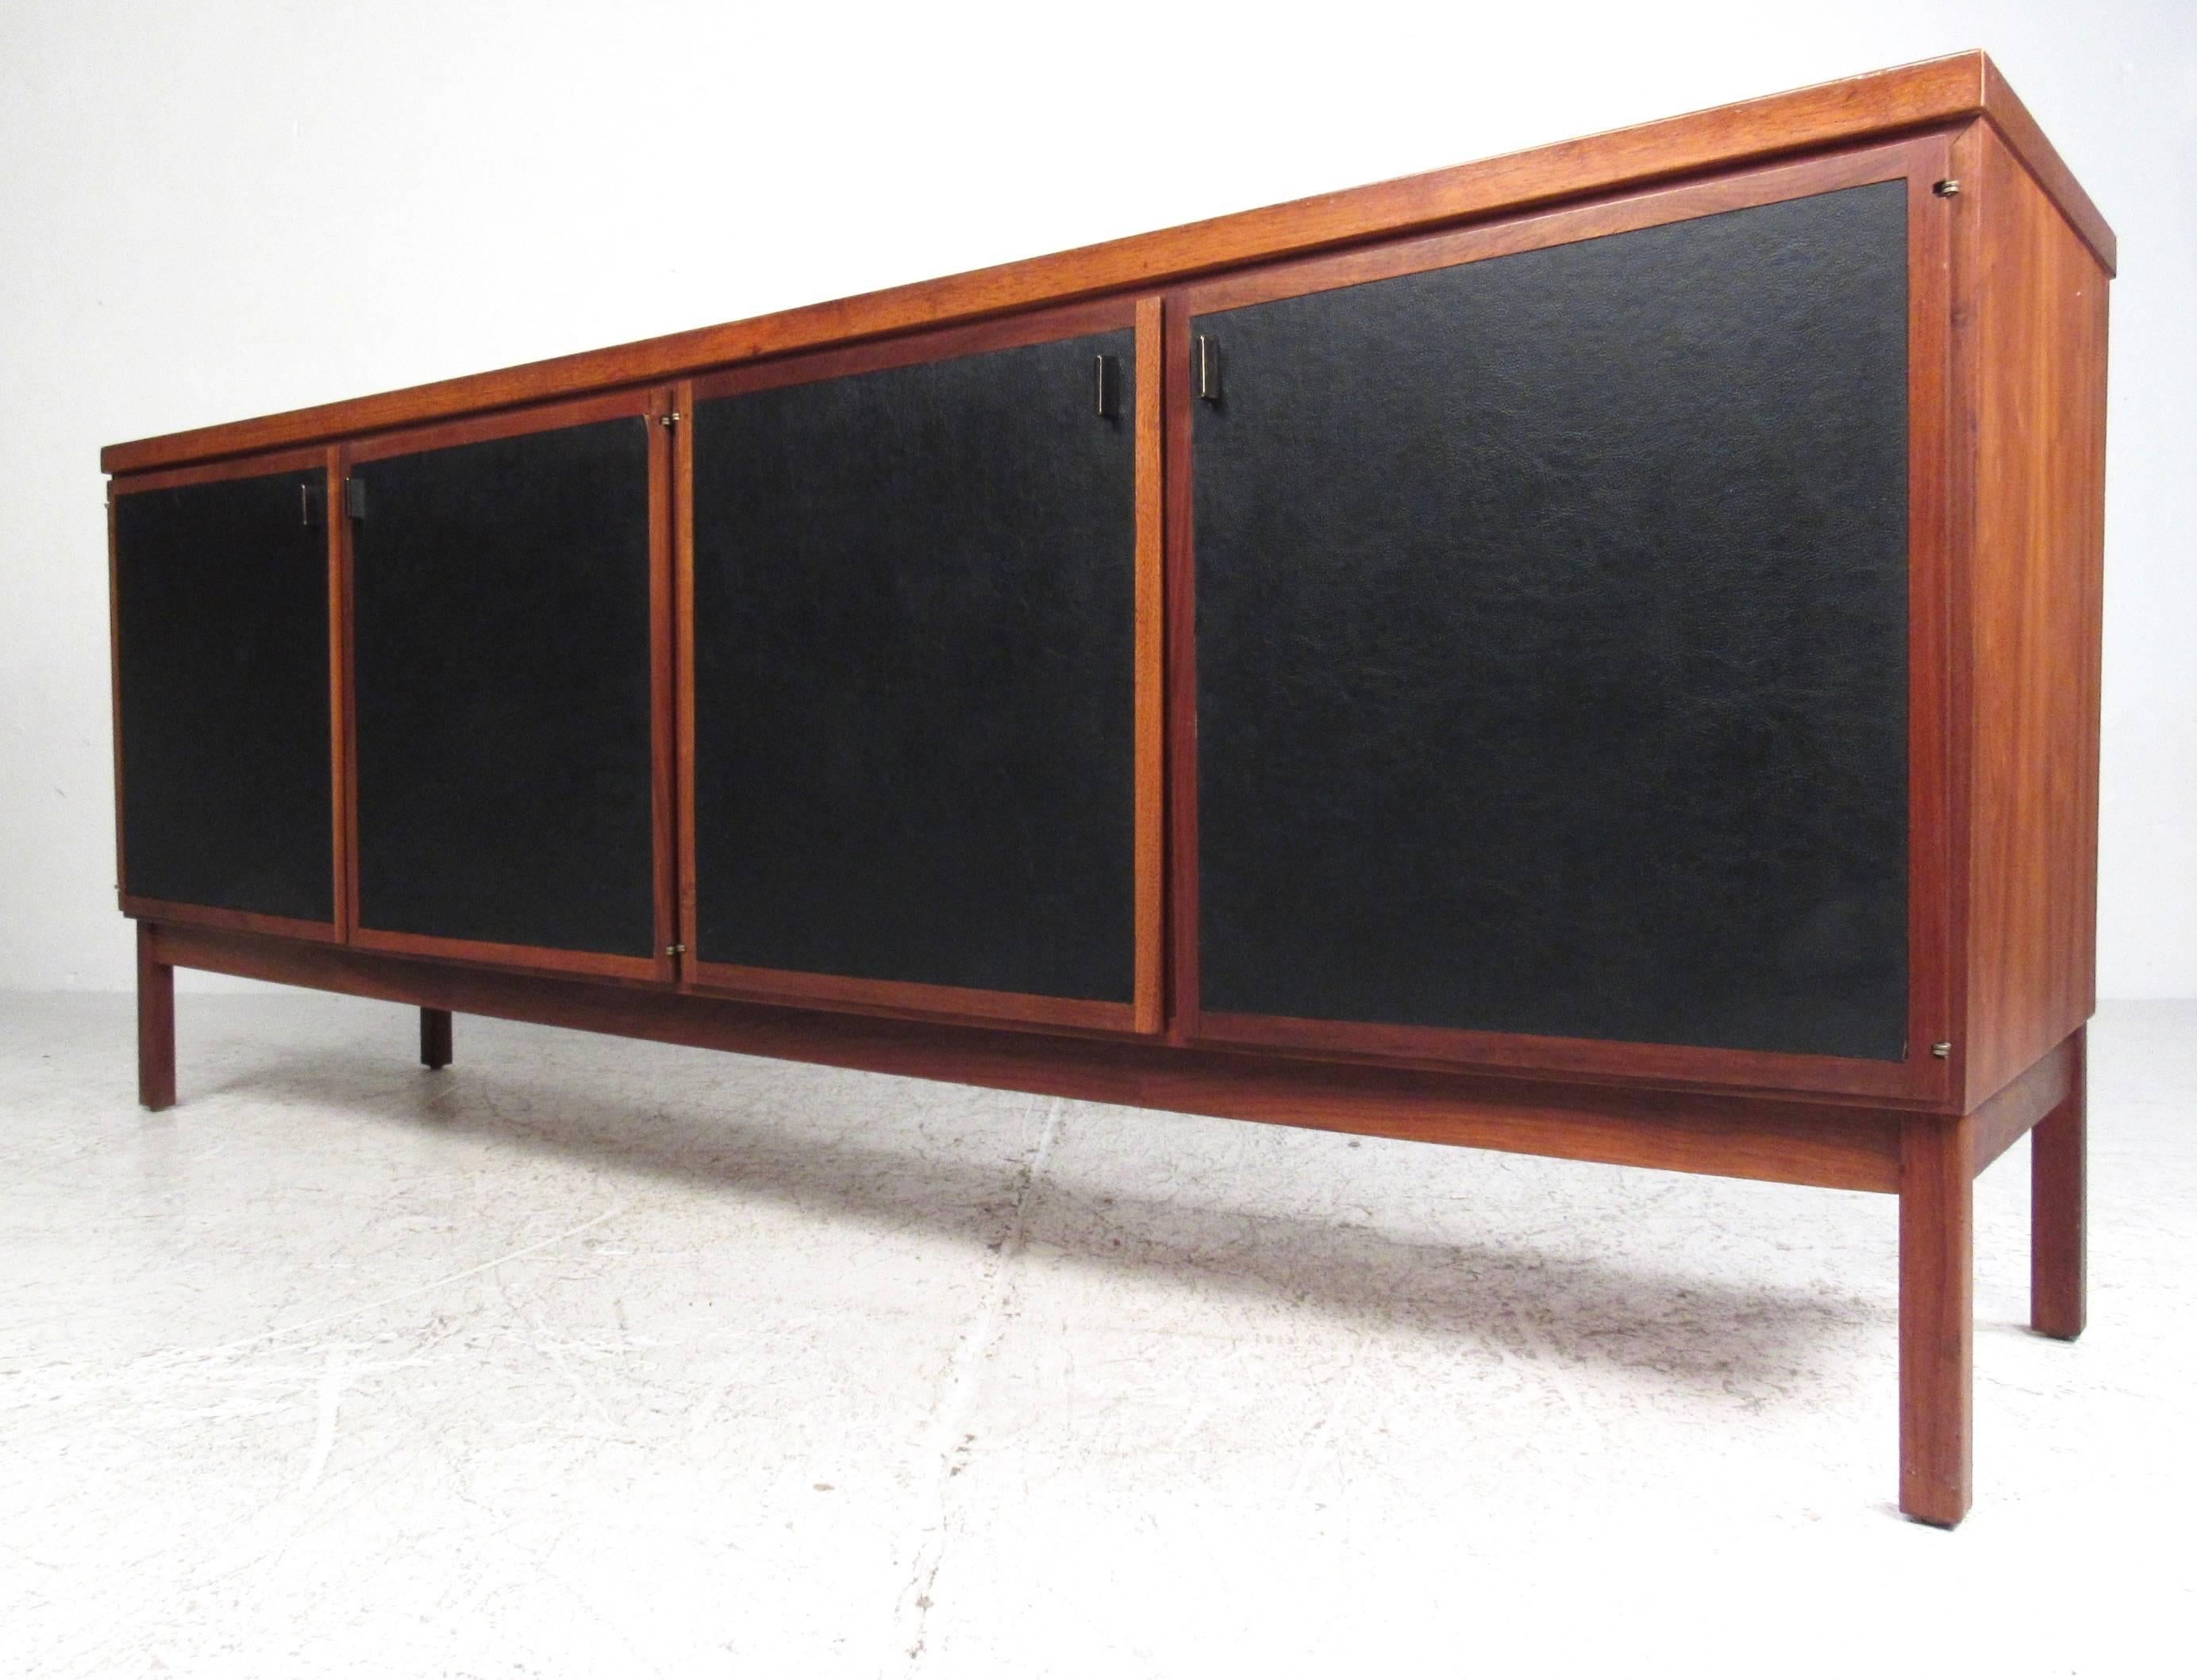 This stunning storage piece features faux leather door fronts and quality teak and walnut construction. Based on a similar design by John Stuart, this Mid-Century Modern piece offers plenty of room for storage and organization in any setting. Please